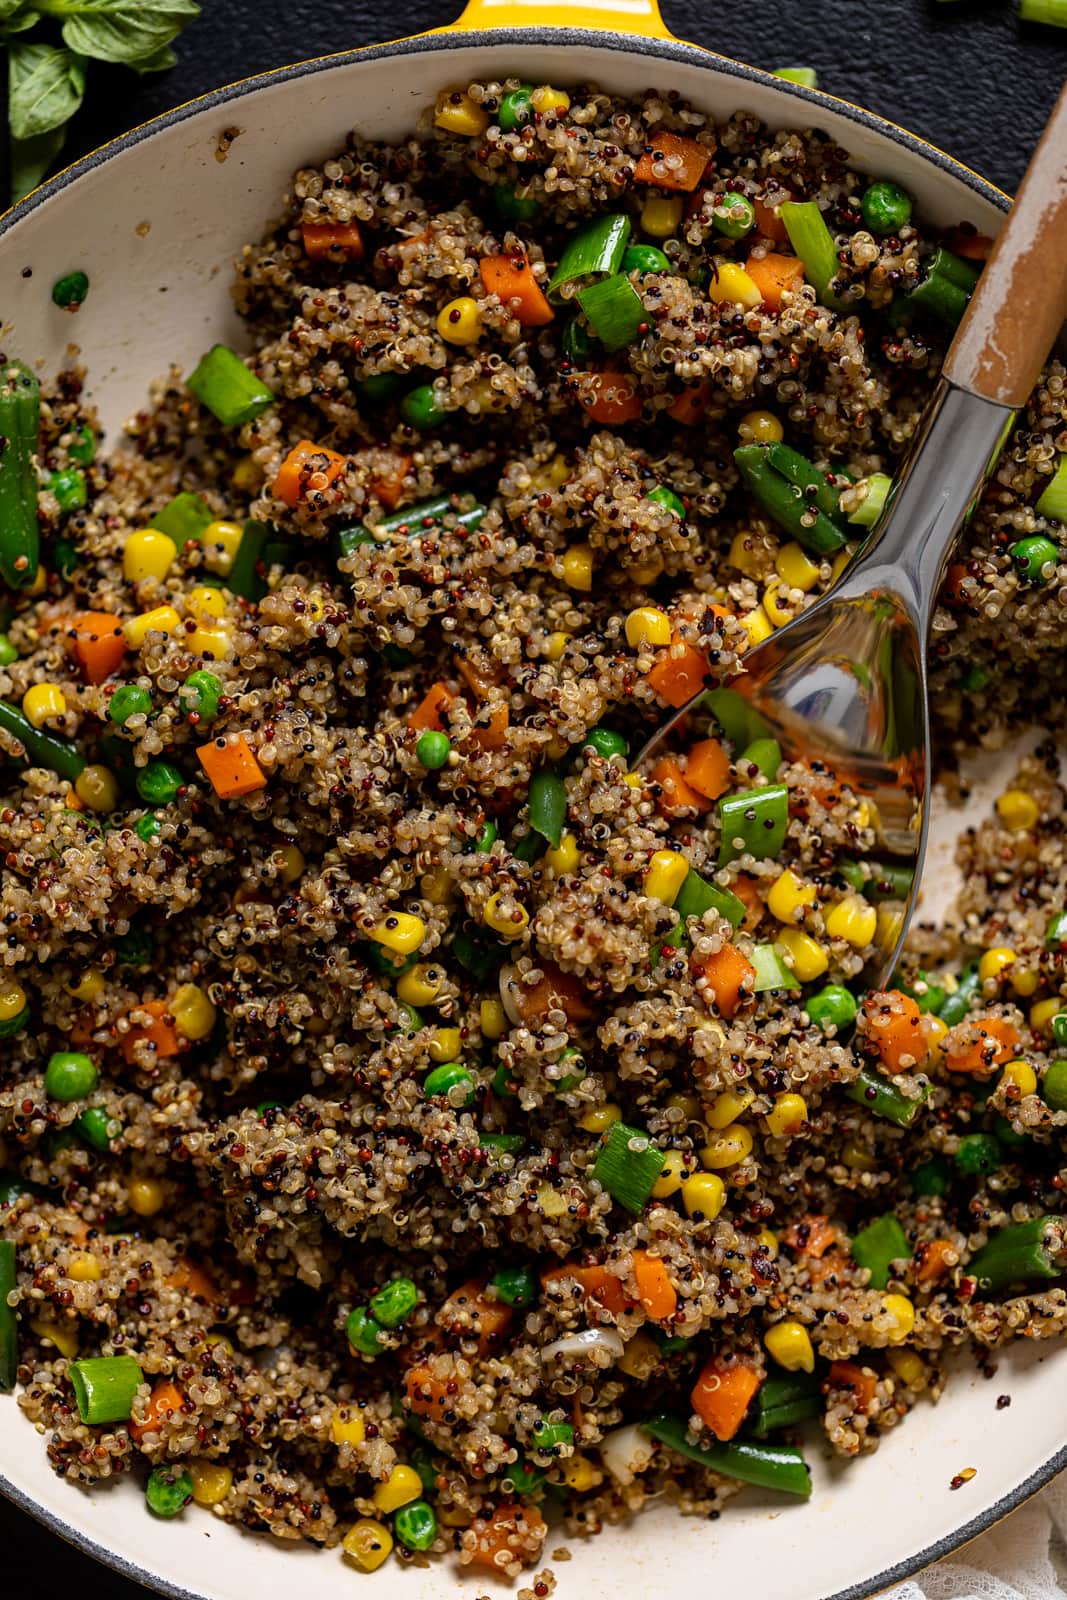 Closeup of a spoon scooping some Vegan Quinoa Fried Rice